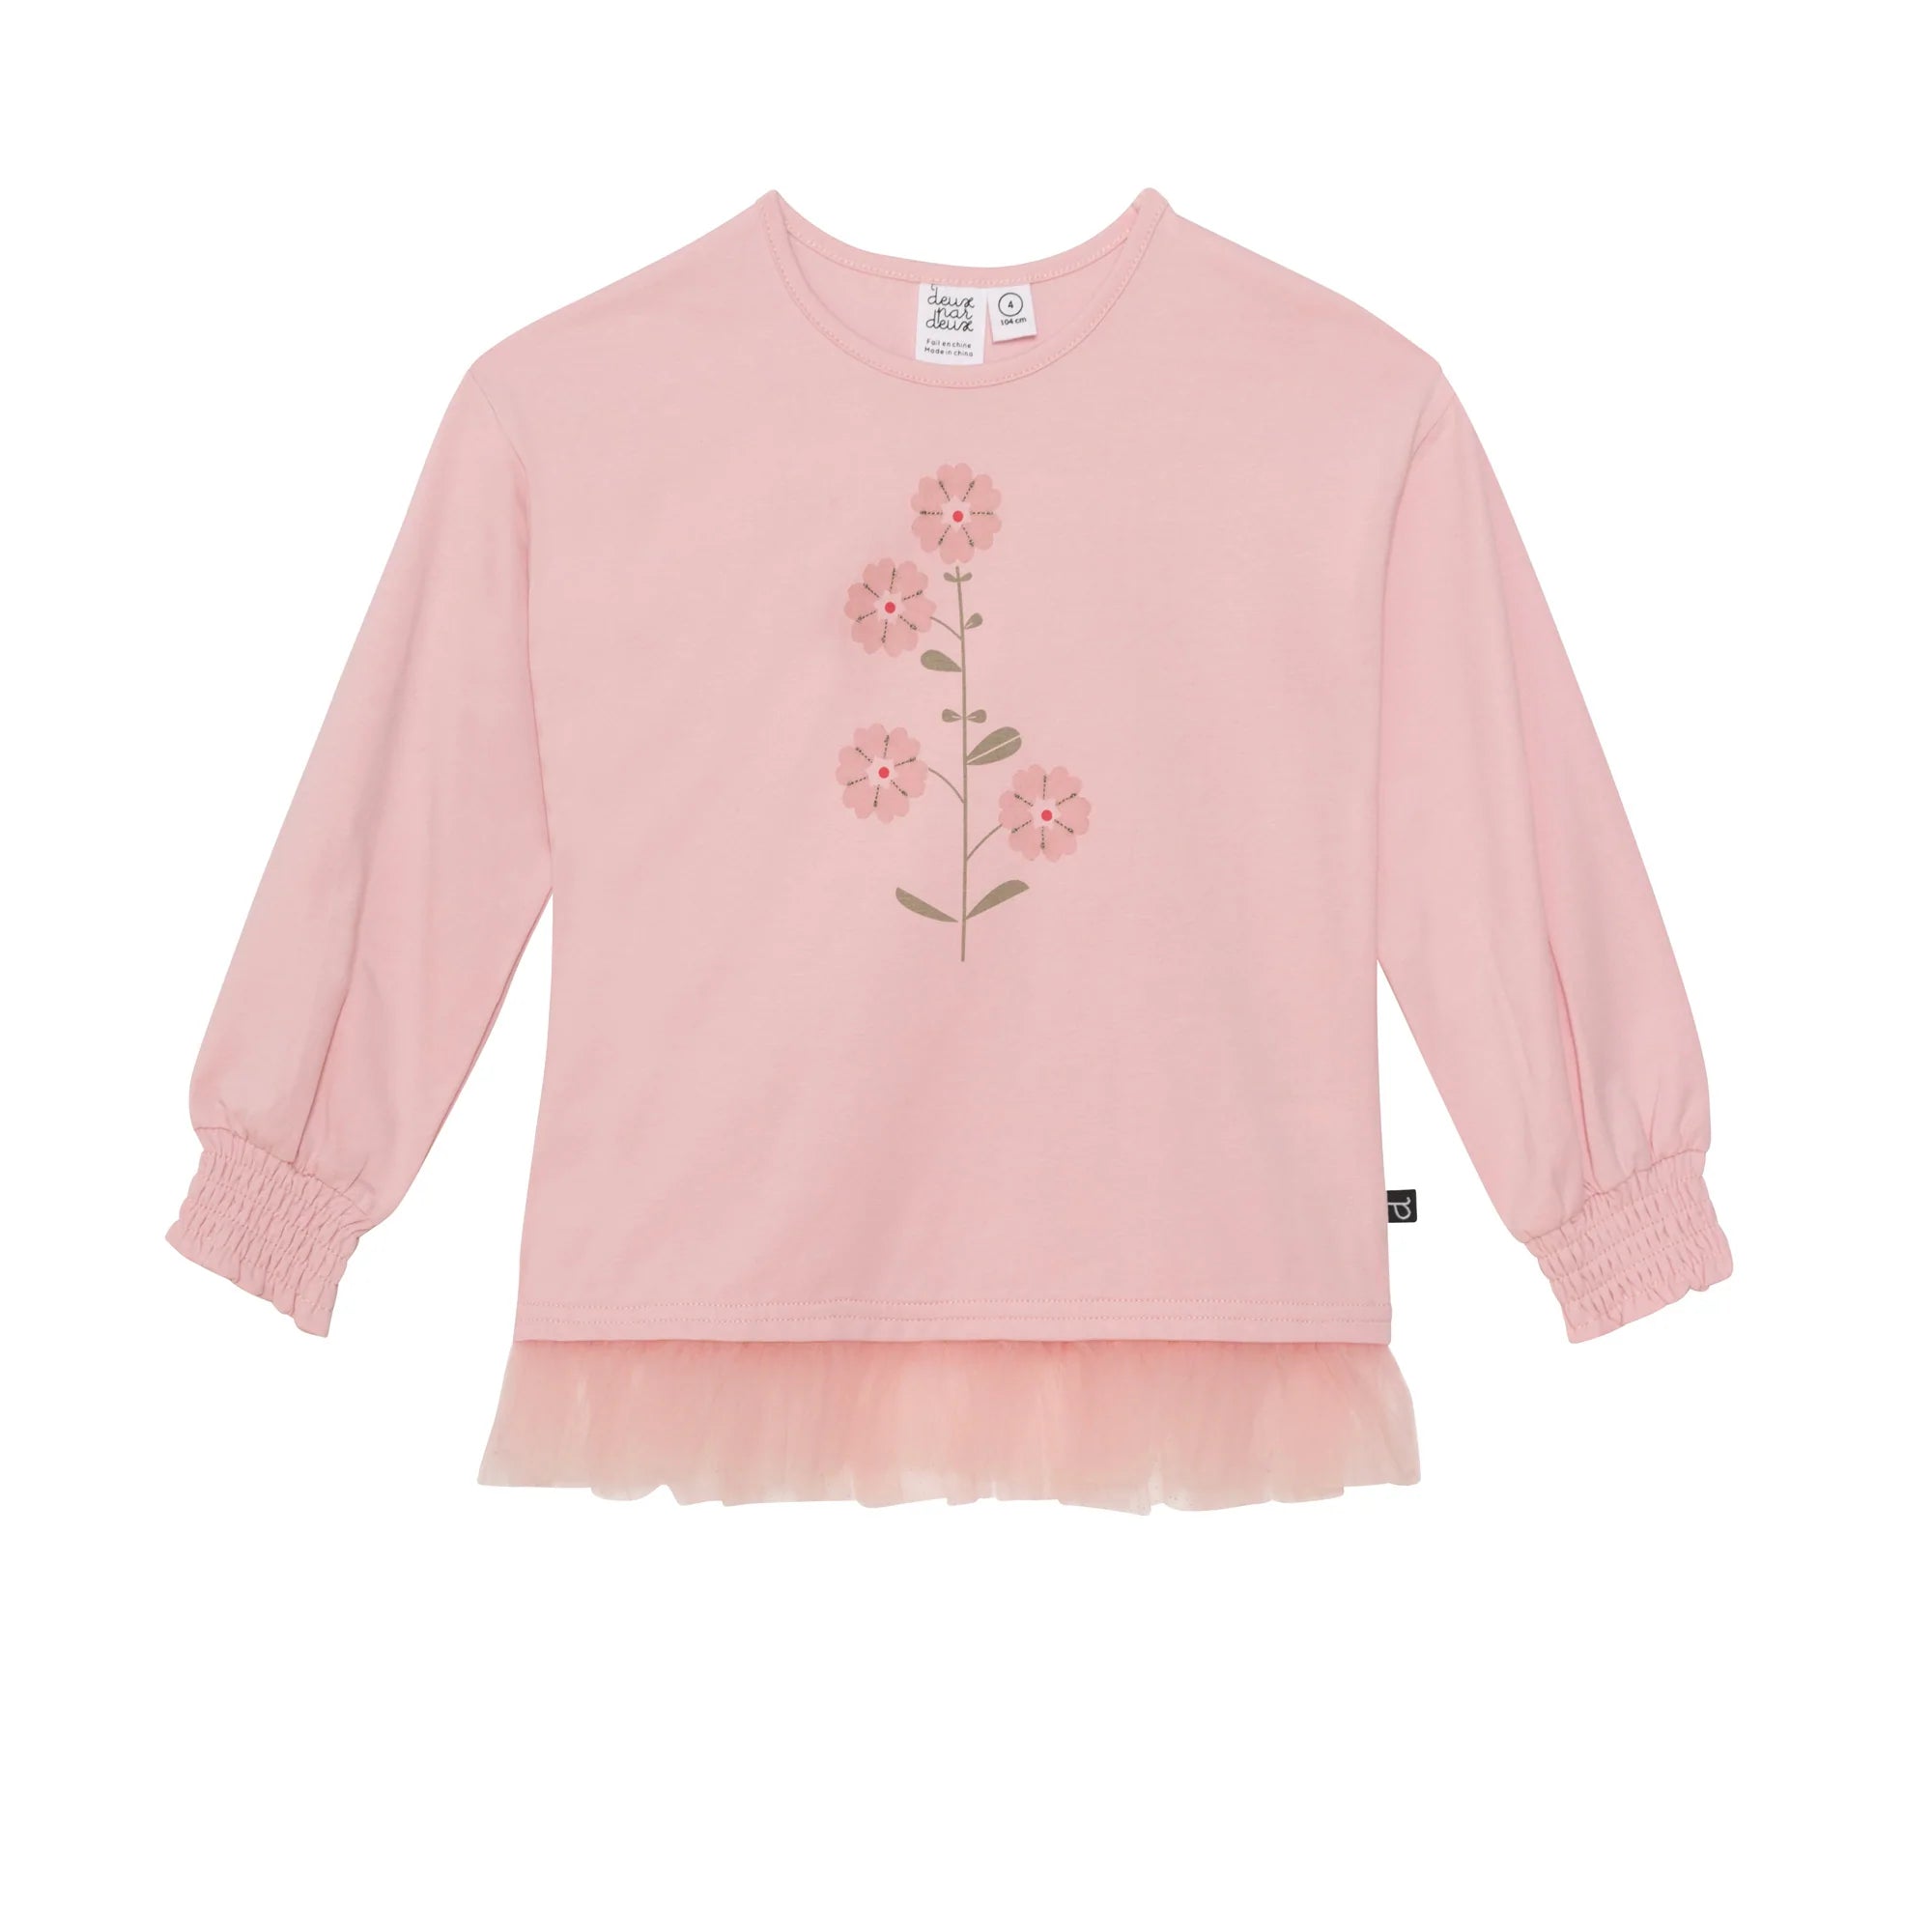 Long Sleeve Graphic Top Light Pink - E30M73_620